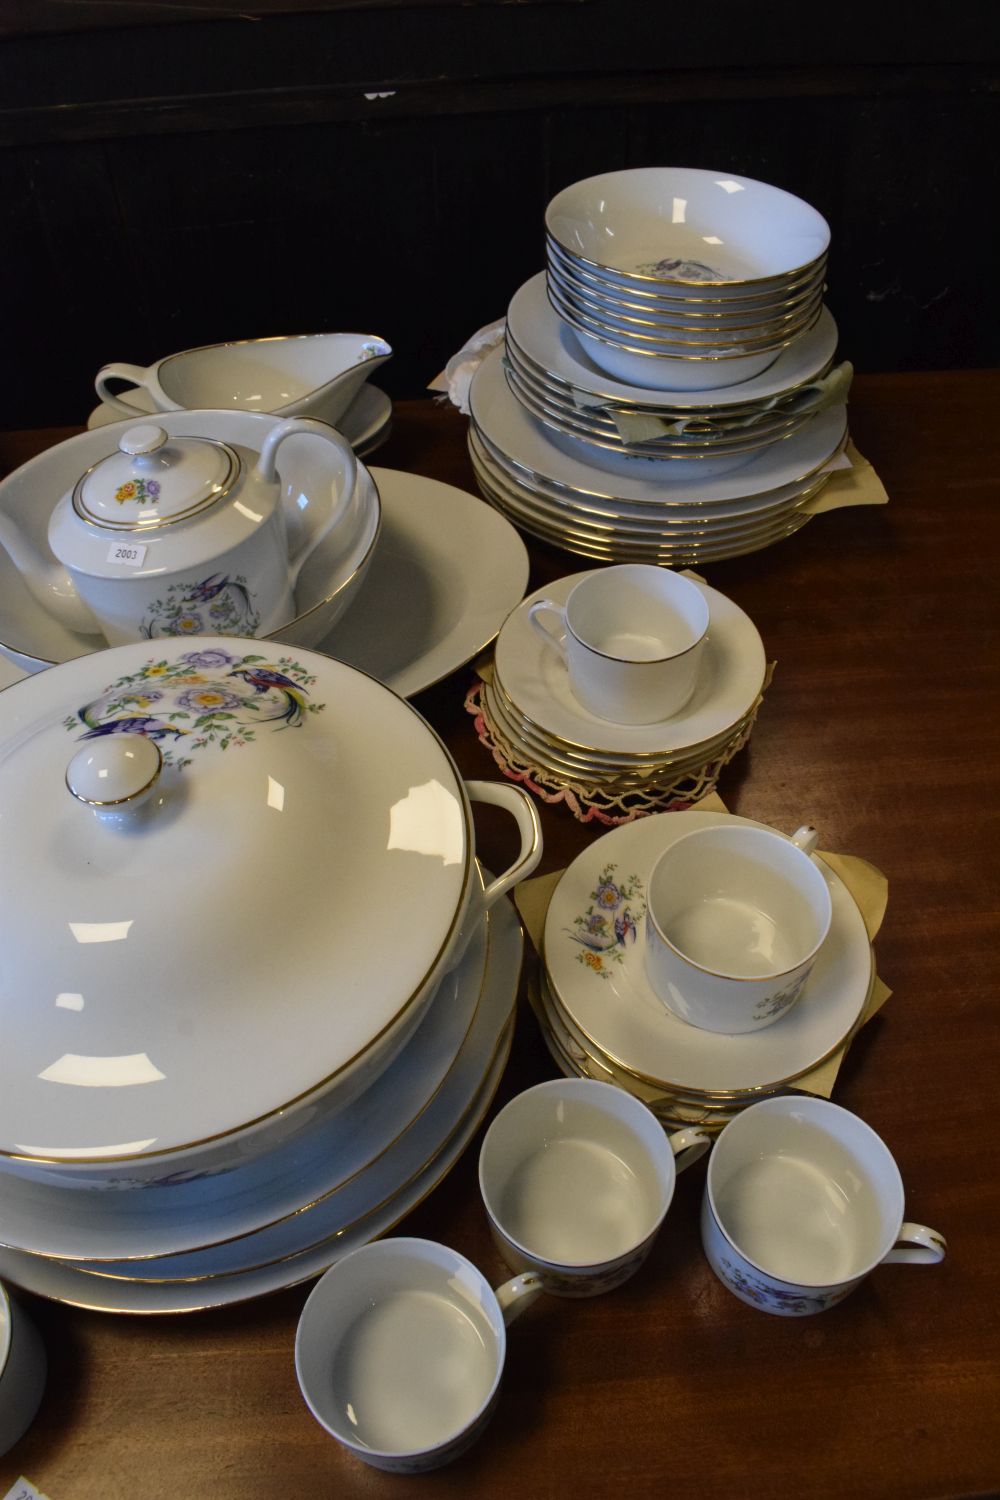 Extensive Limoges porcelain dinner and coffee service in the Royal Limoges pattern - Image 4 of 11